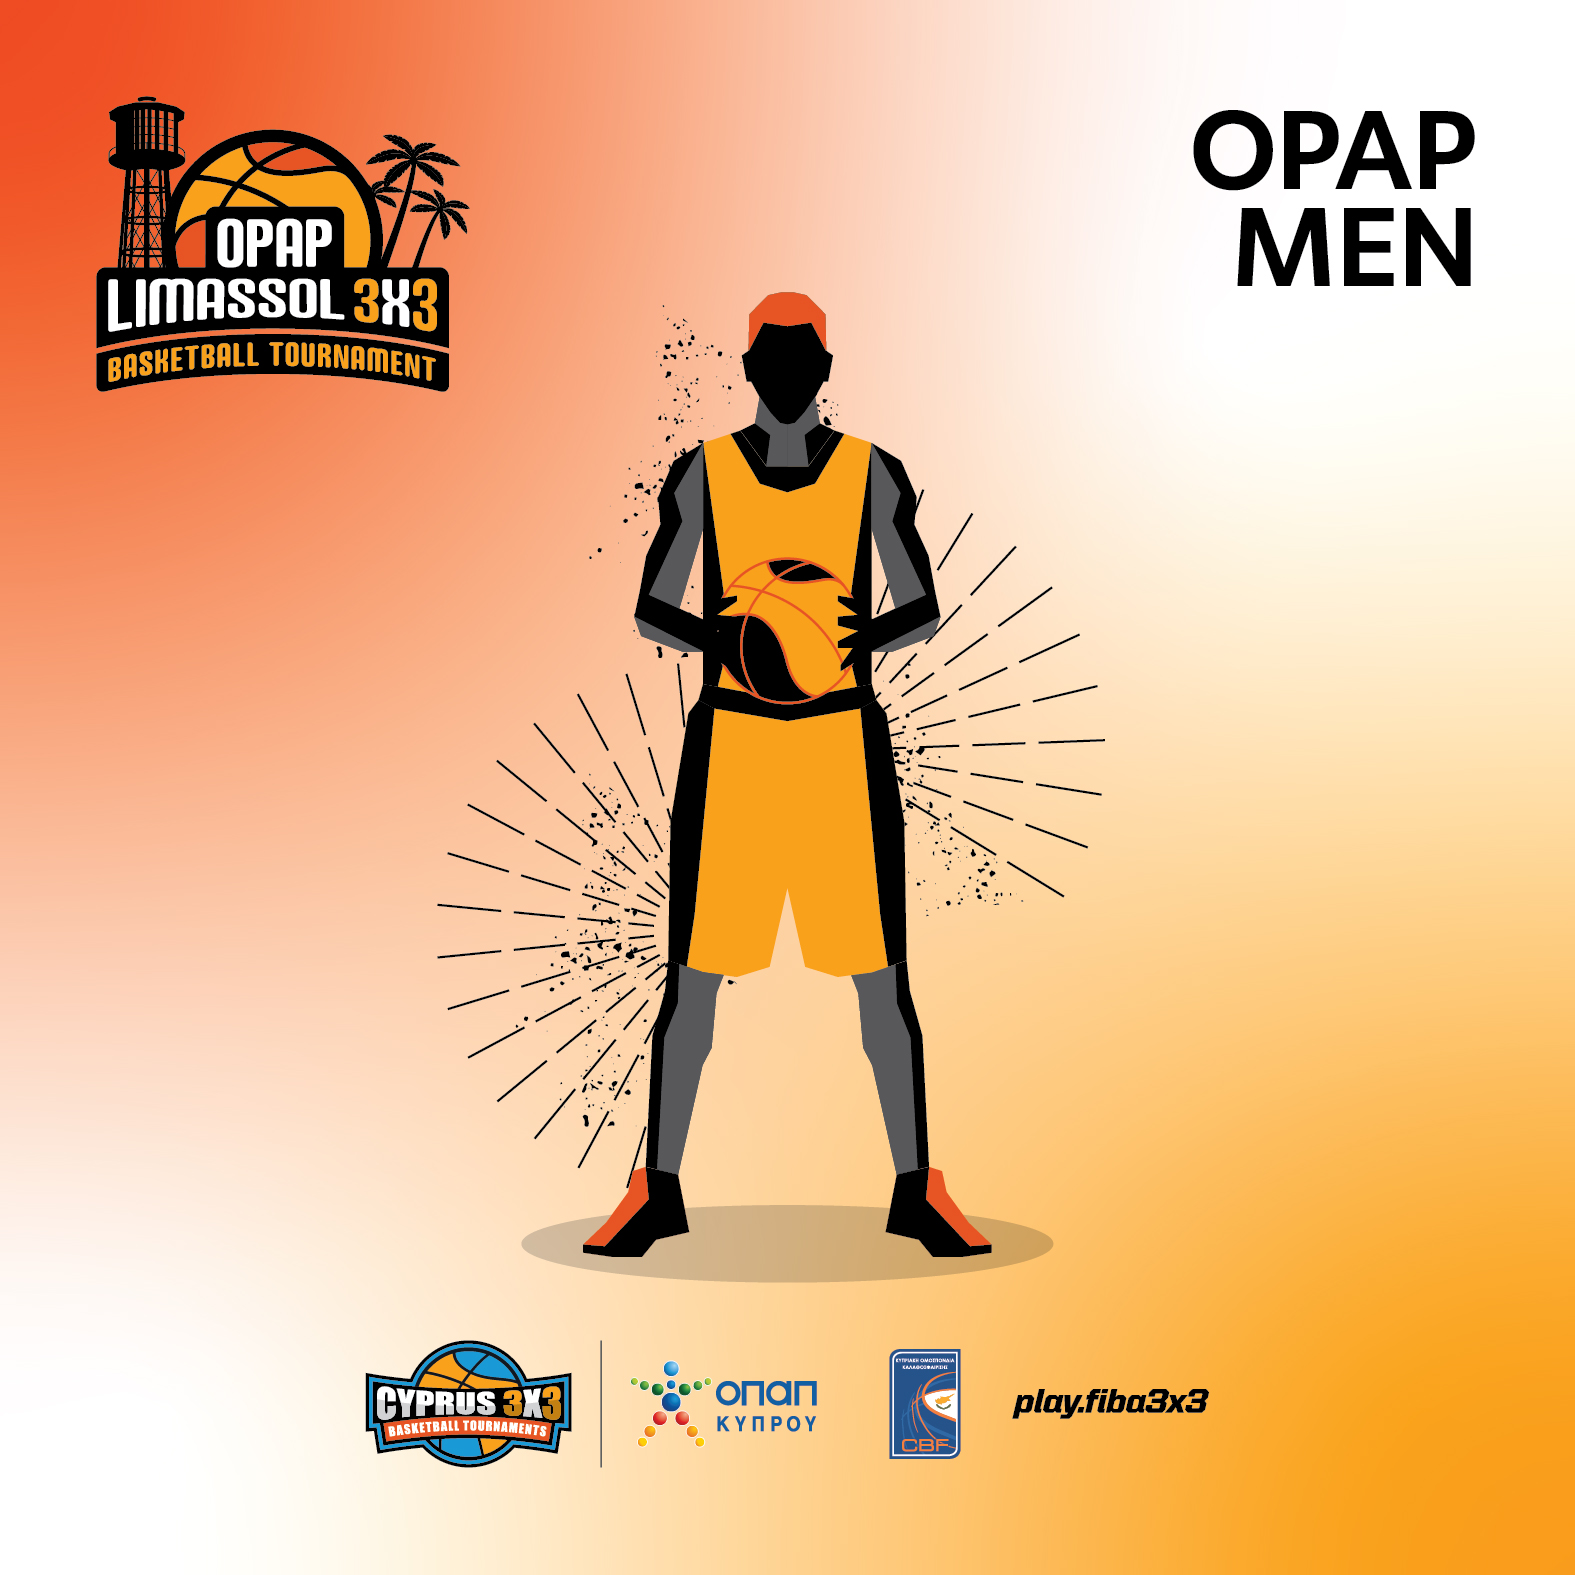 Read more about the article Open Men – Limassol 3×3